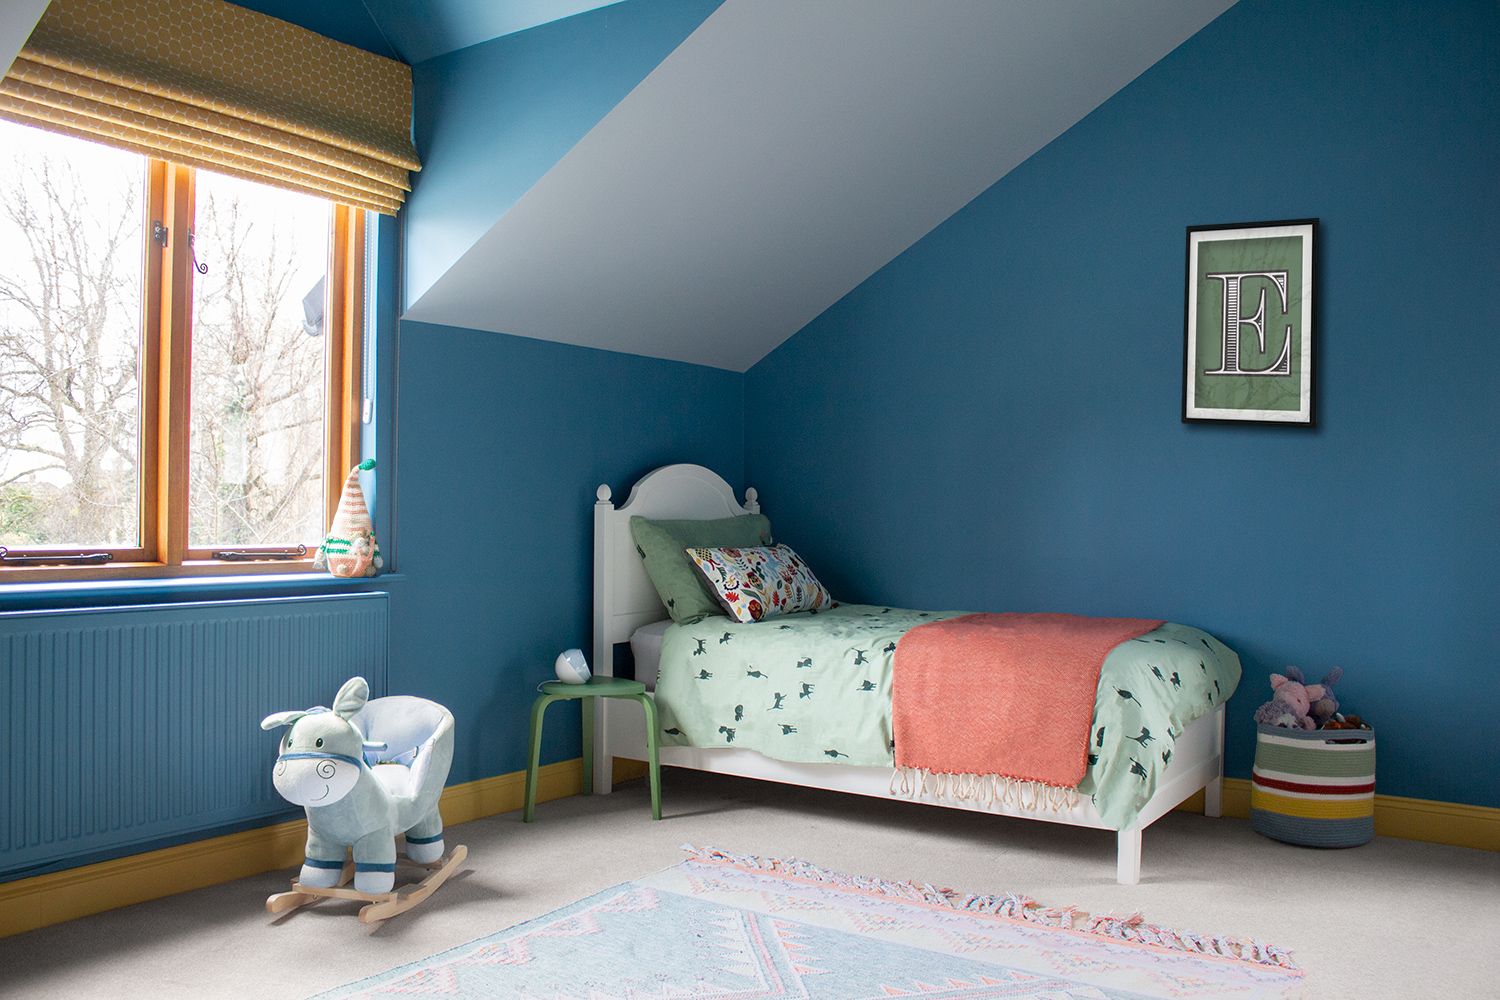 A photo of a child's bedroom showing the blue walls and the bed in the corner.